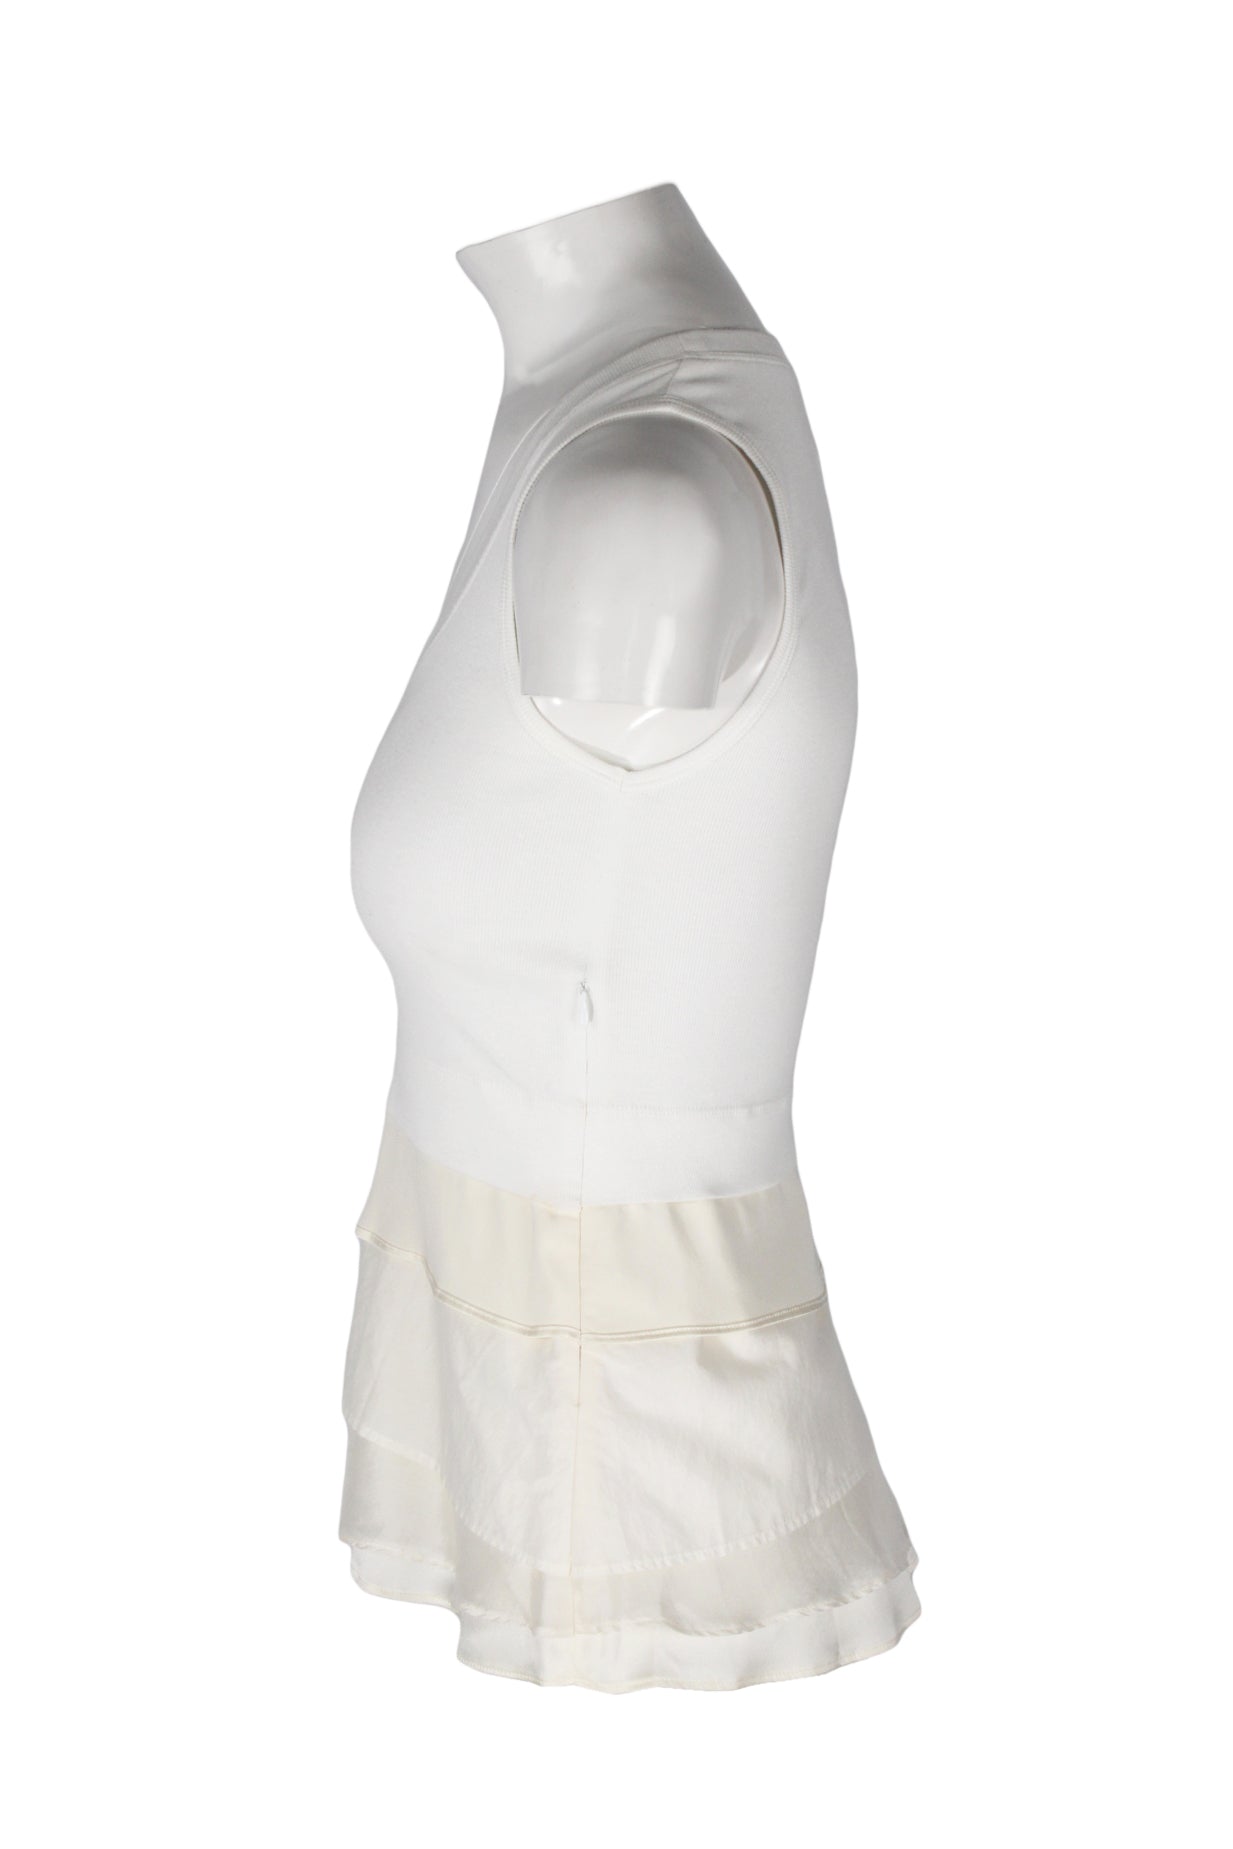 side angle brunello cucinelli knit tank on feminine mannequin torso featuring tiered lower panels and invisible side zip closure.